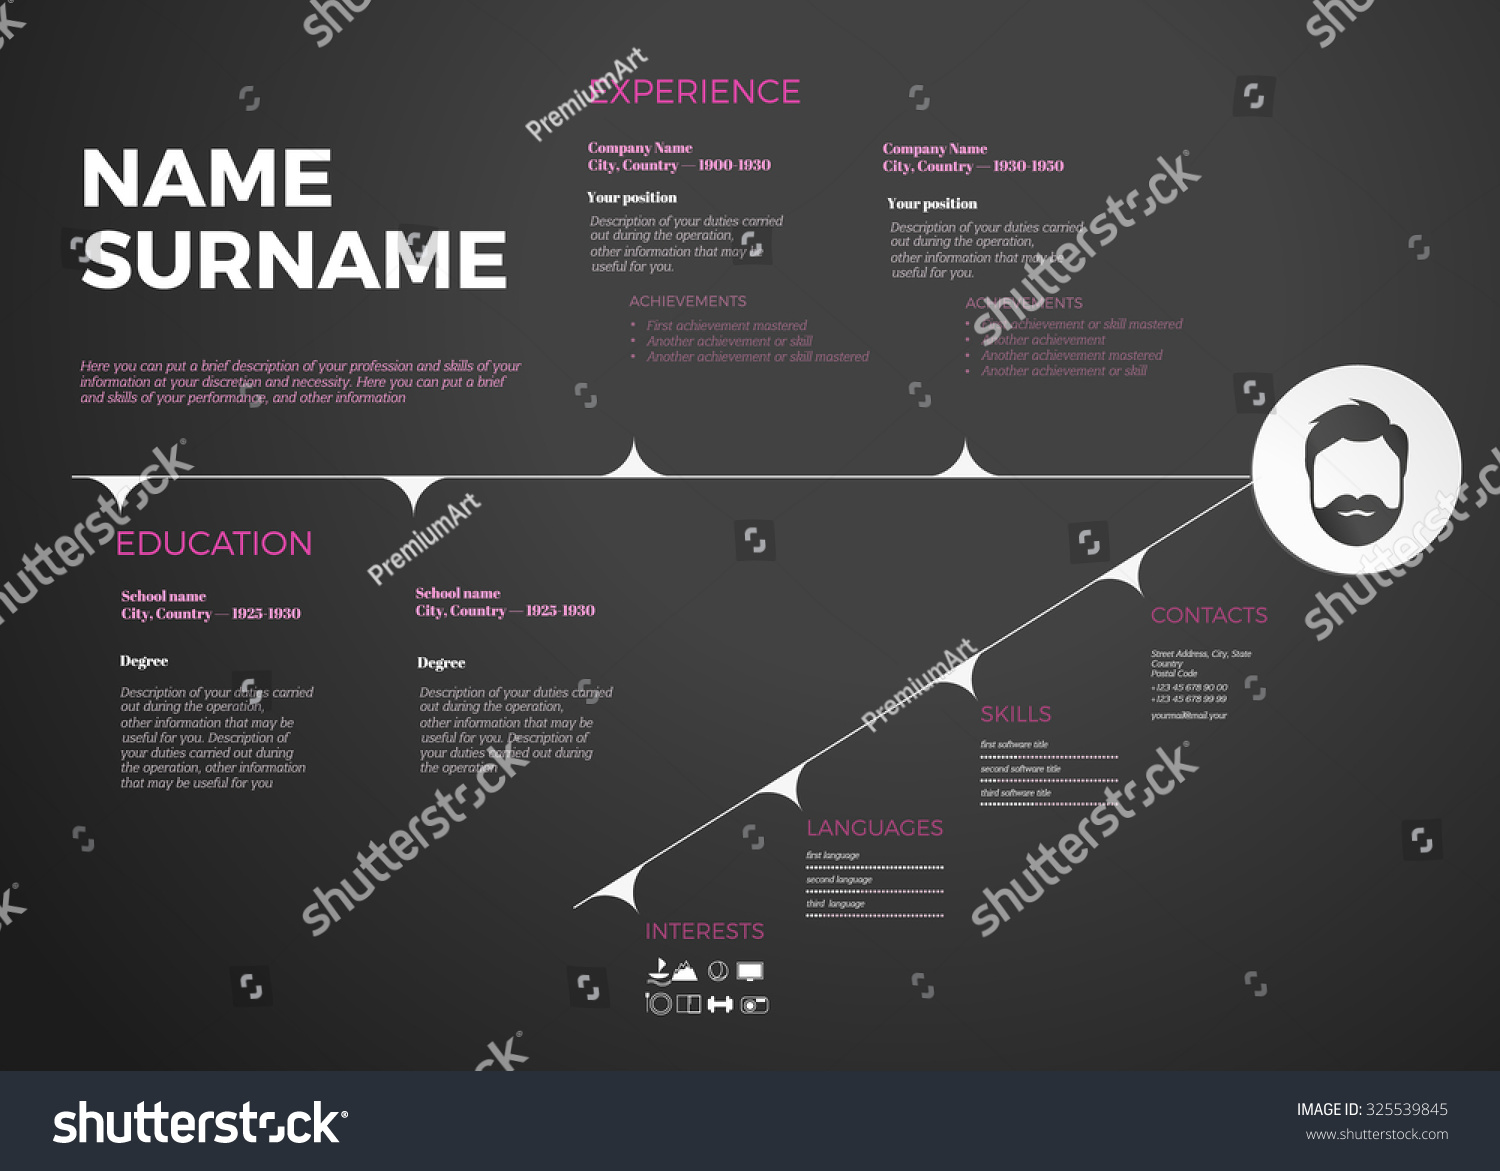 Timeline Resume Template from image.shutterstock.com